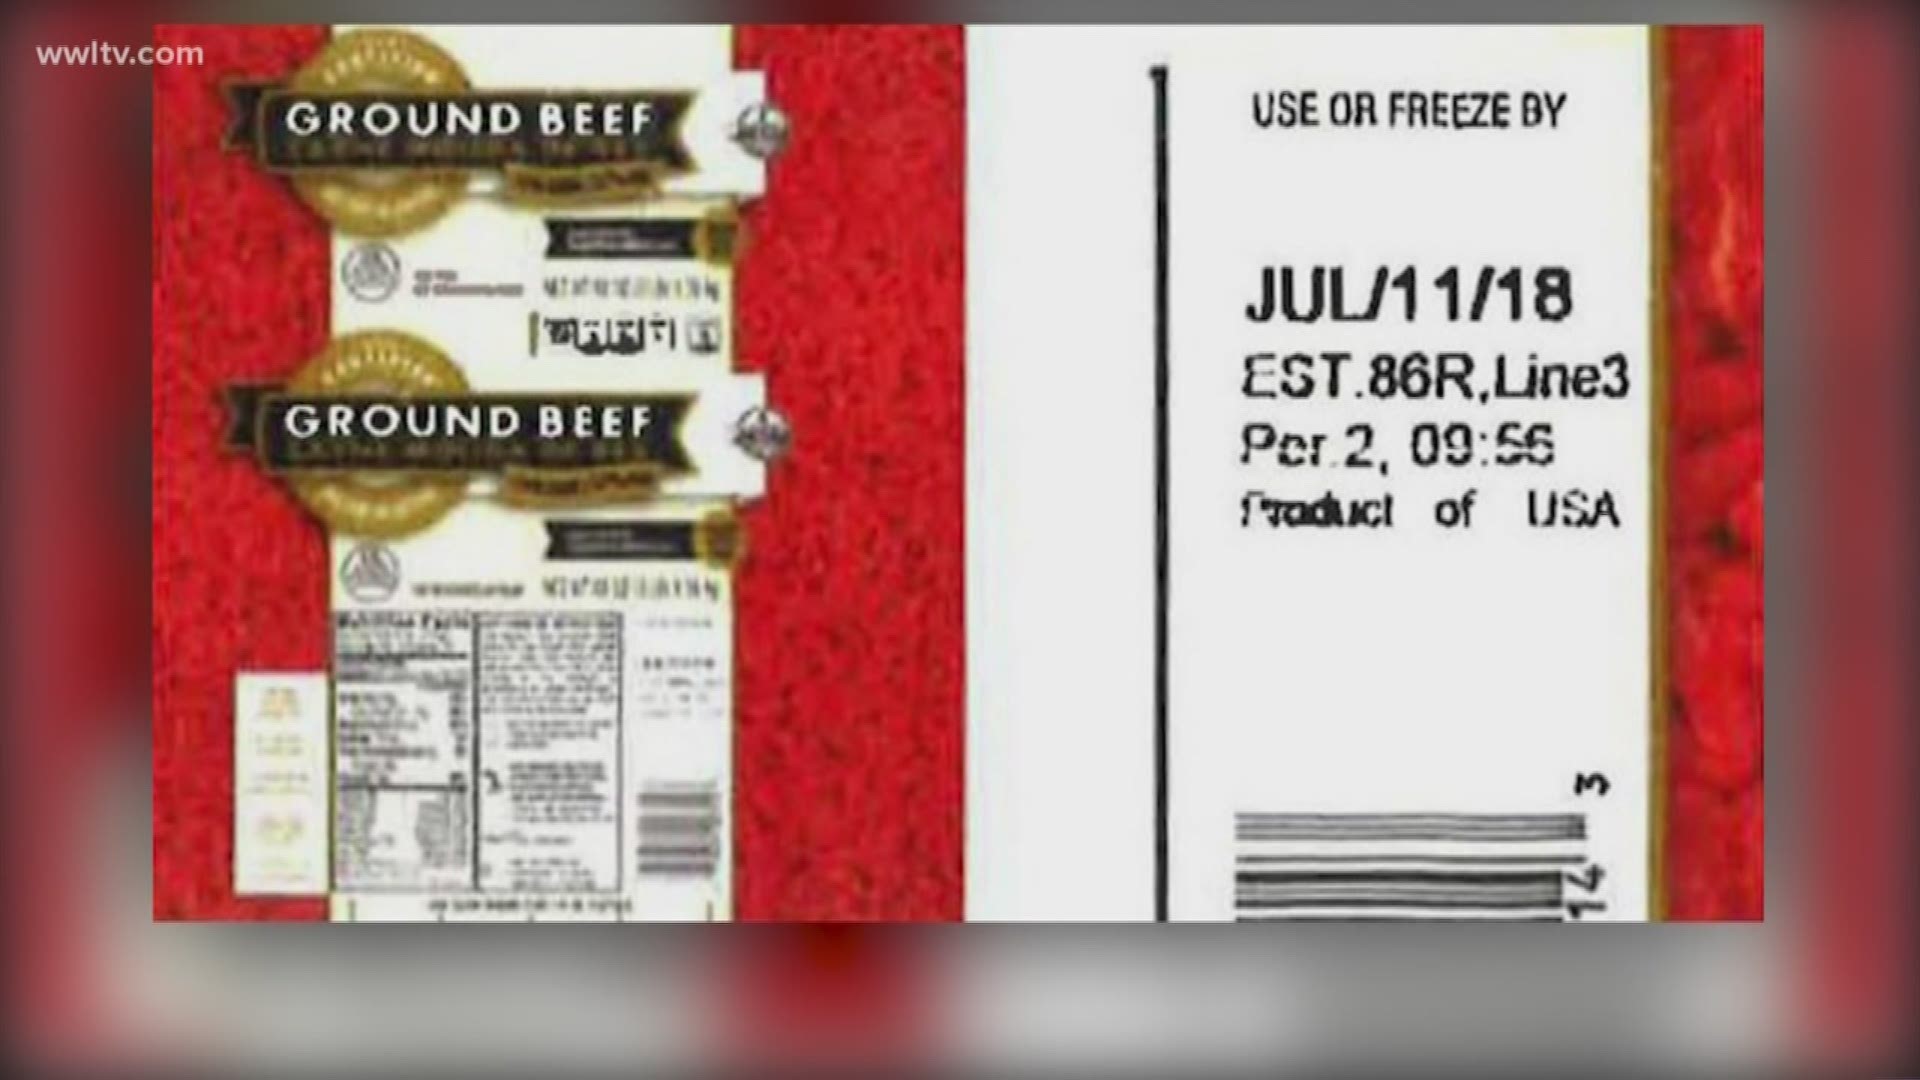 If you're planning to grill some hamburgers this weekend for your game-watching party, don't forget about that ground beef recall. 